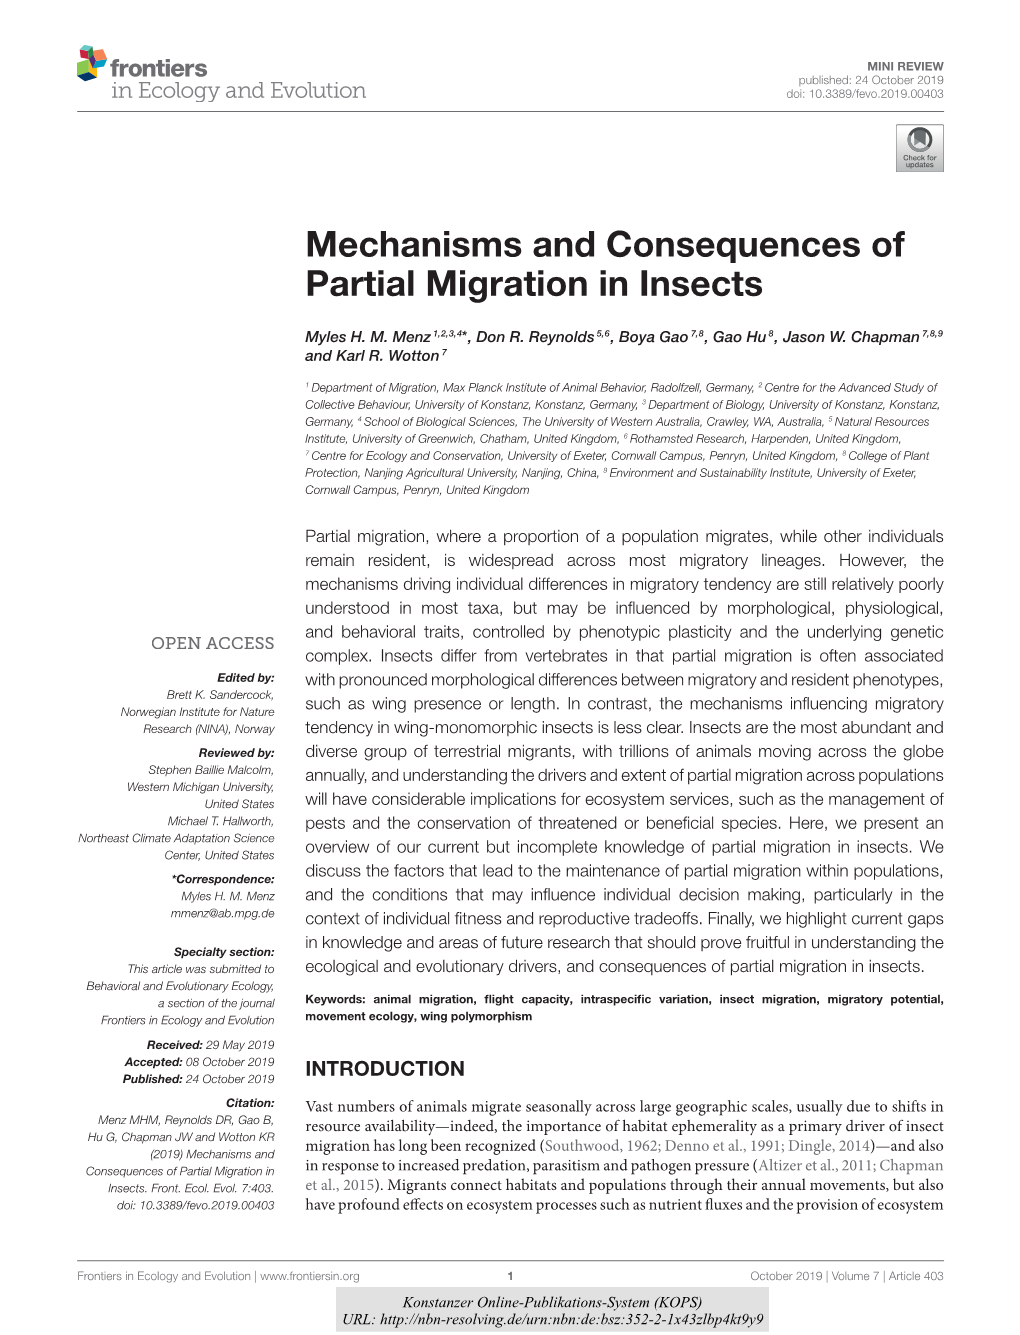 Mechanisms and Consequences of Partial Migration in Insects